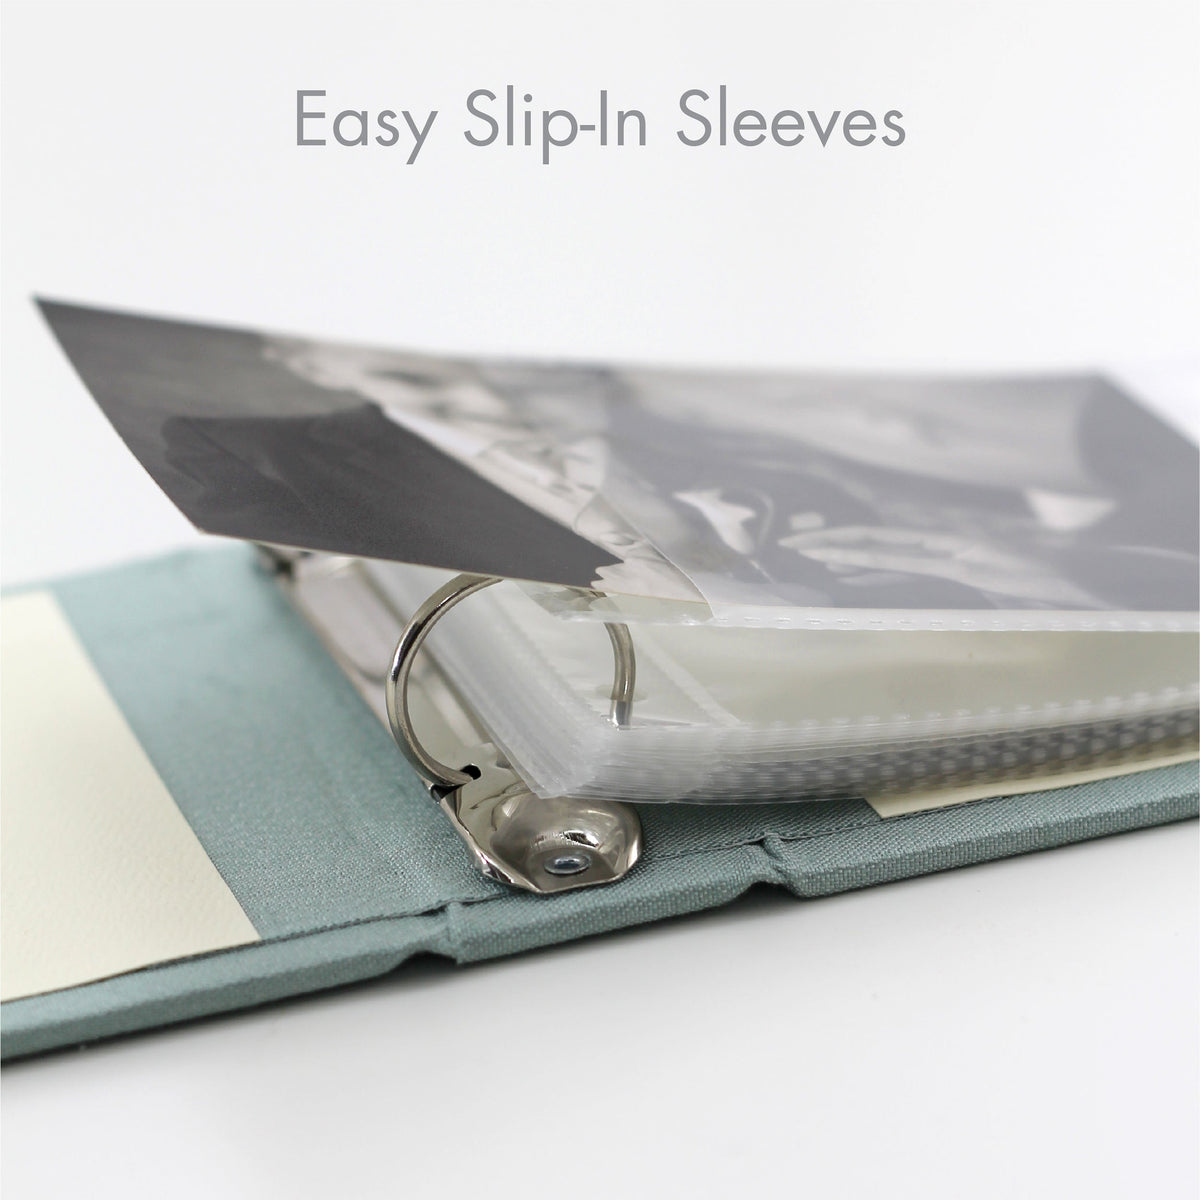 Small Photo Binder | for 4x6 Photos | with Celery Cotton Cover